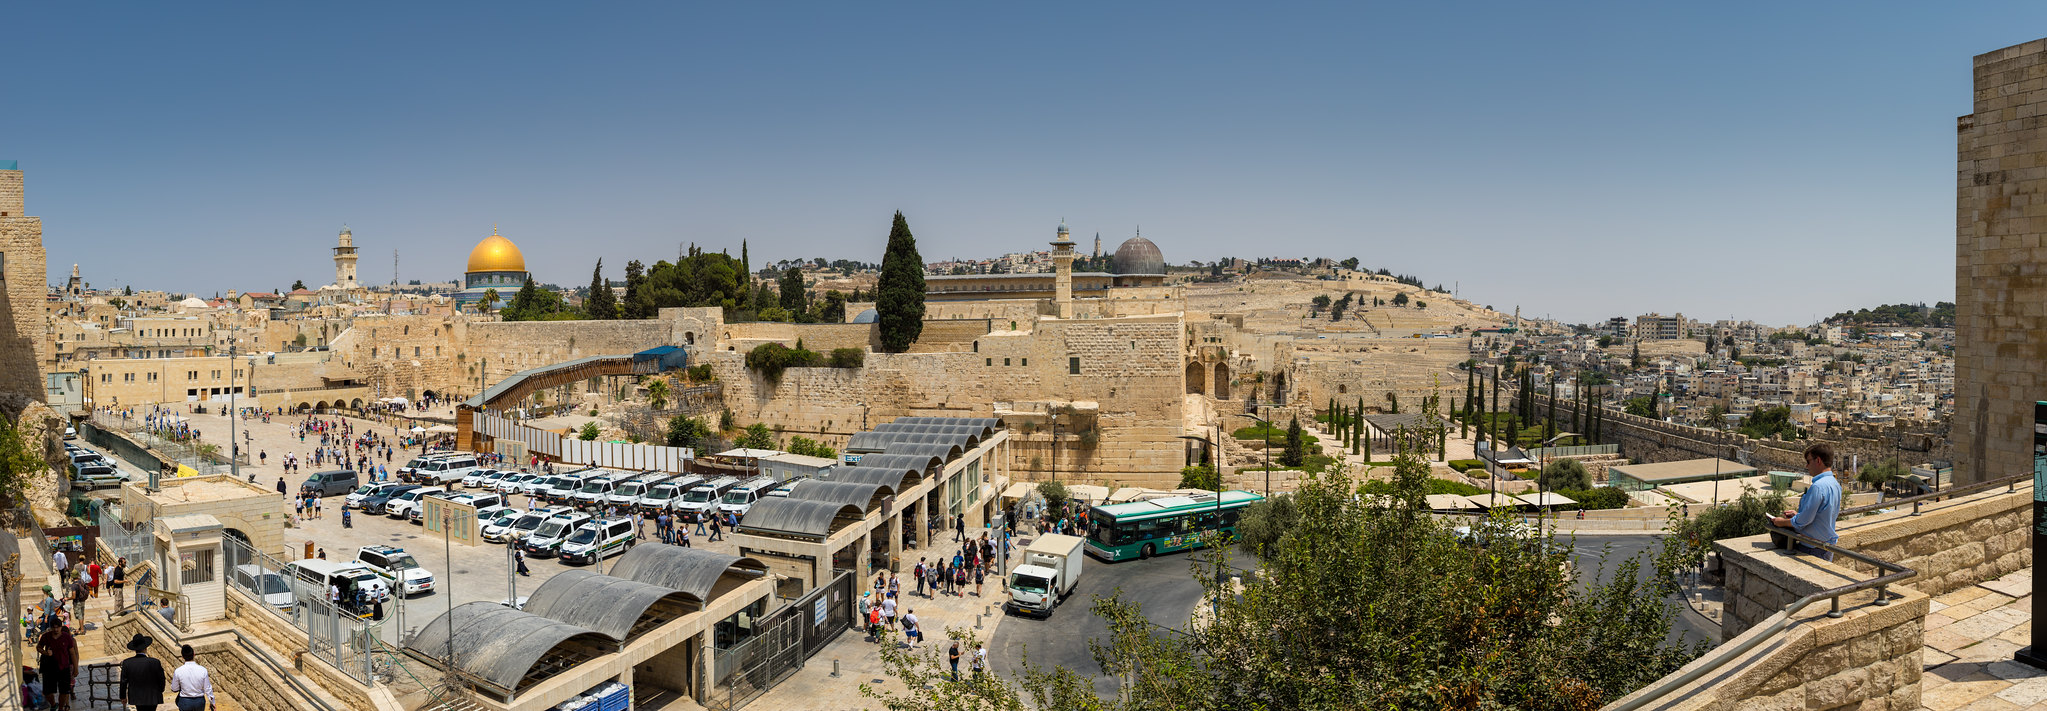 The Western Wall and Dome of the Rock